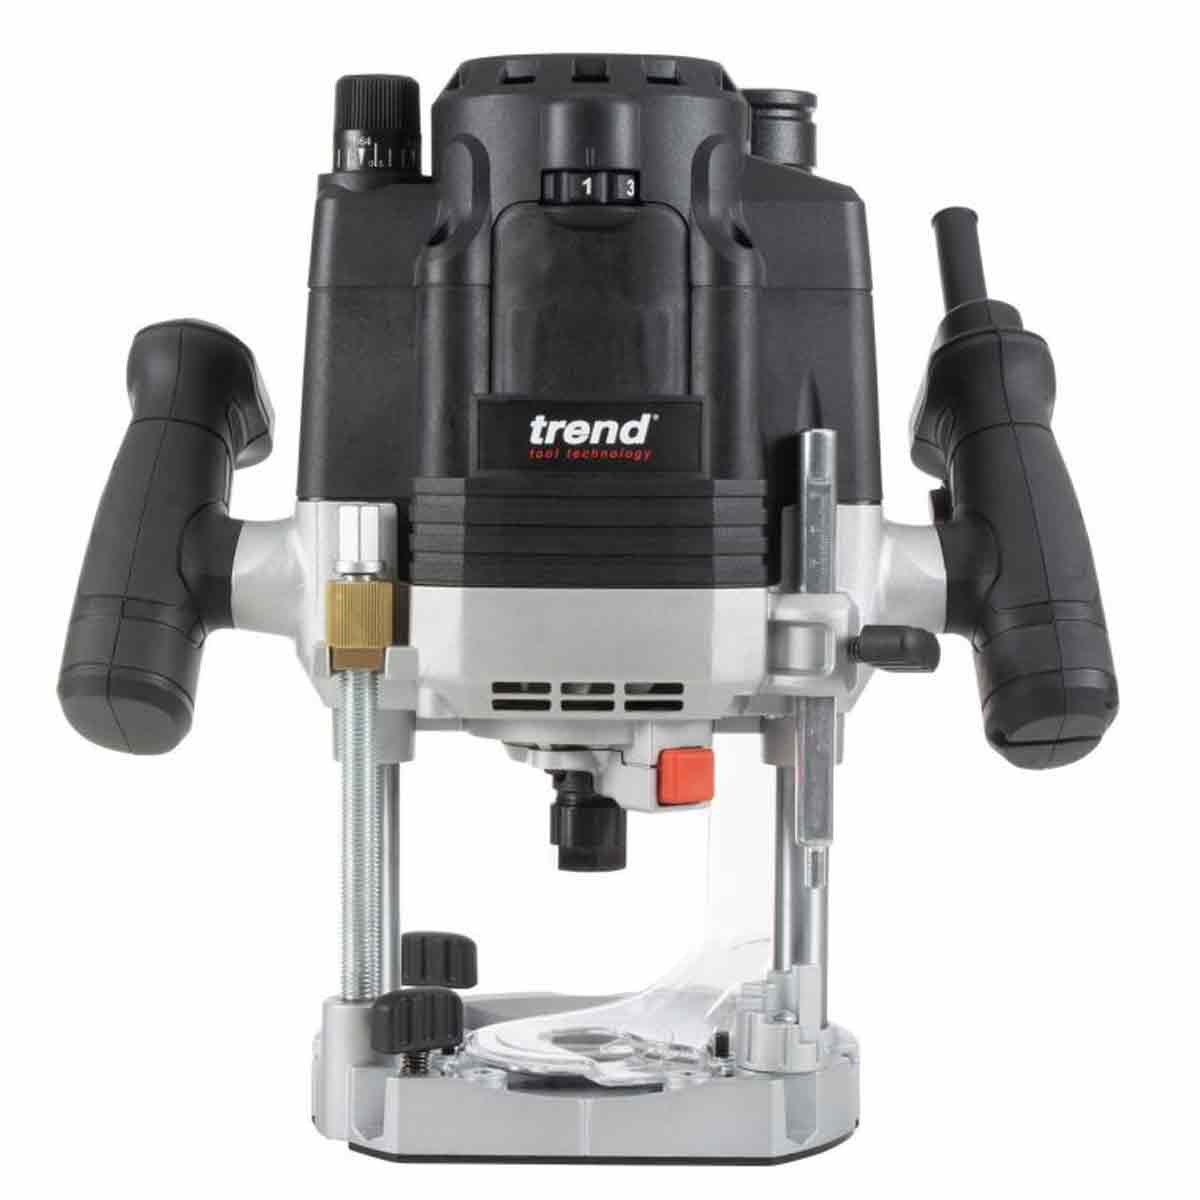 Trend T8ELK 1/2in Dual Mode Plunge Router 110V/2200W With Carry Case